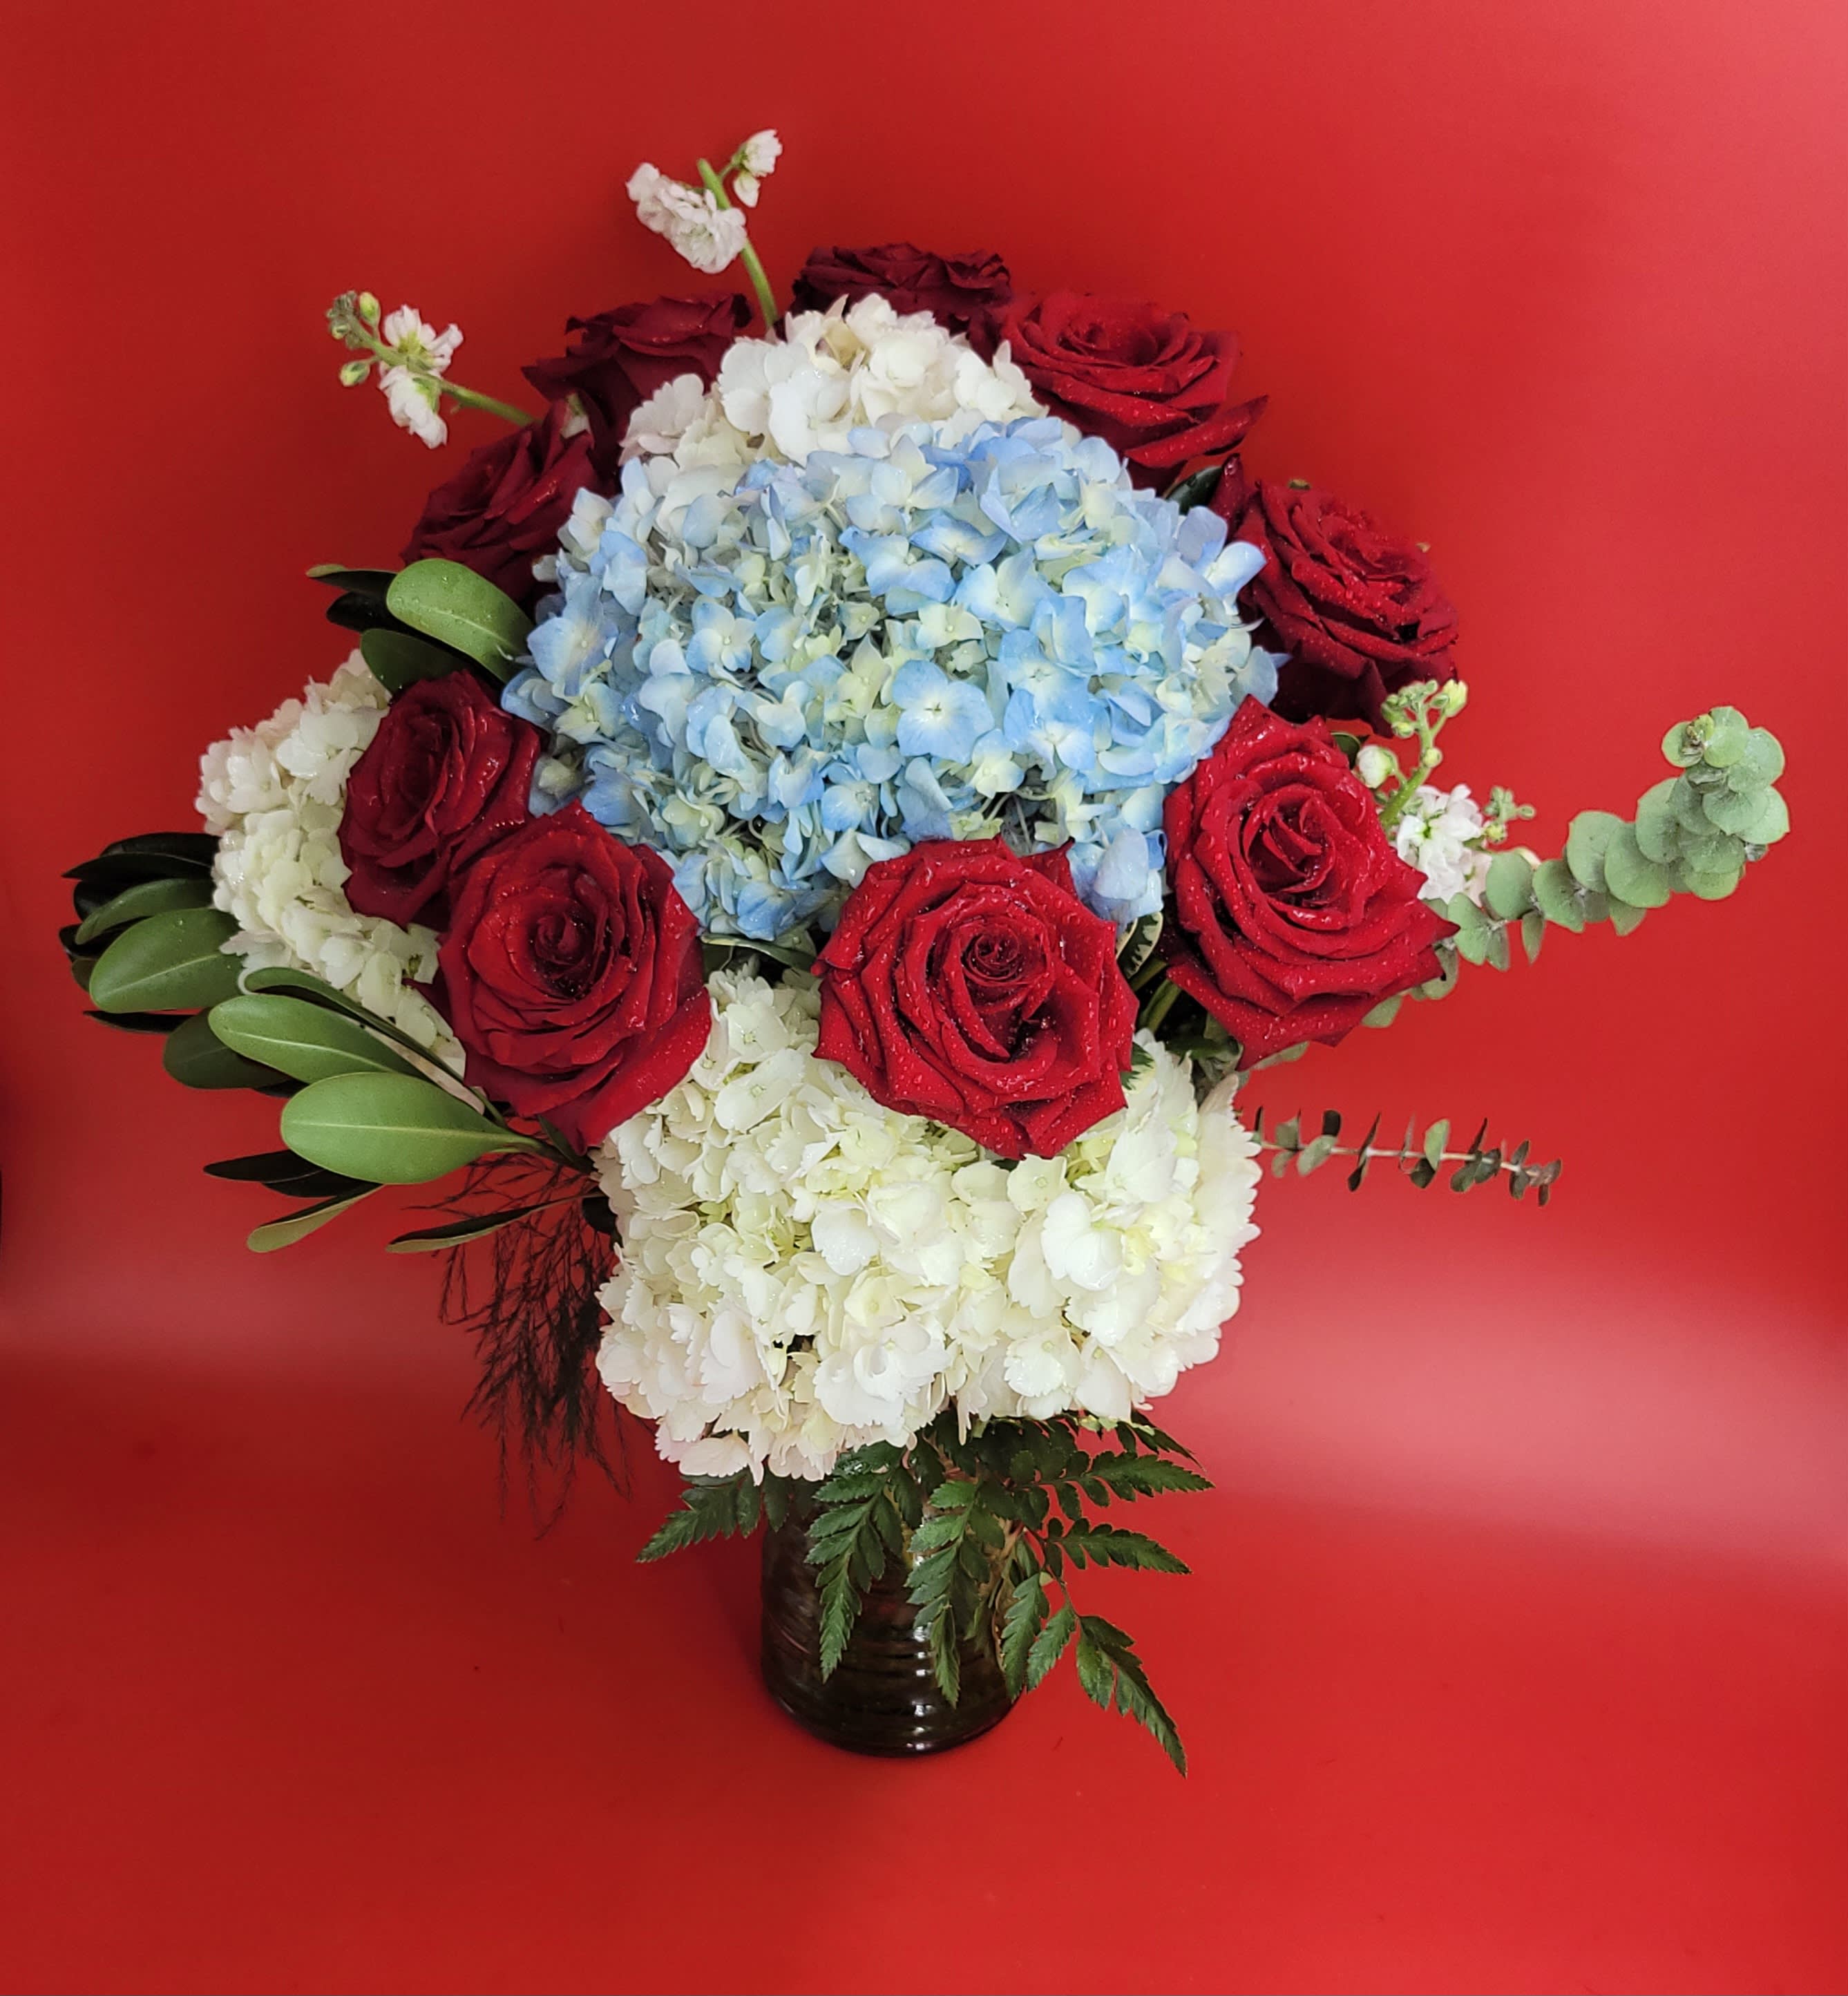 A touch of blue - She is different!  Hydrangeas and roses